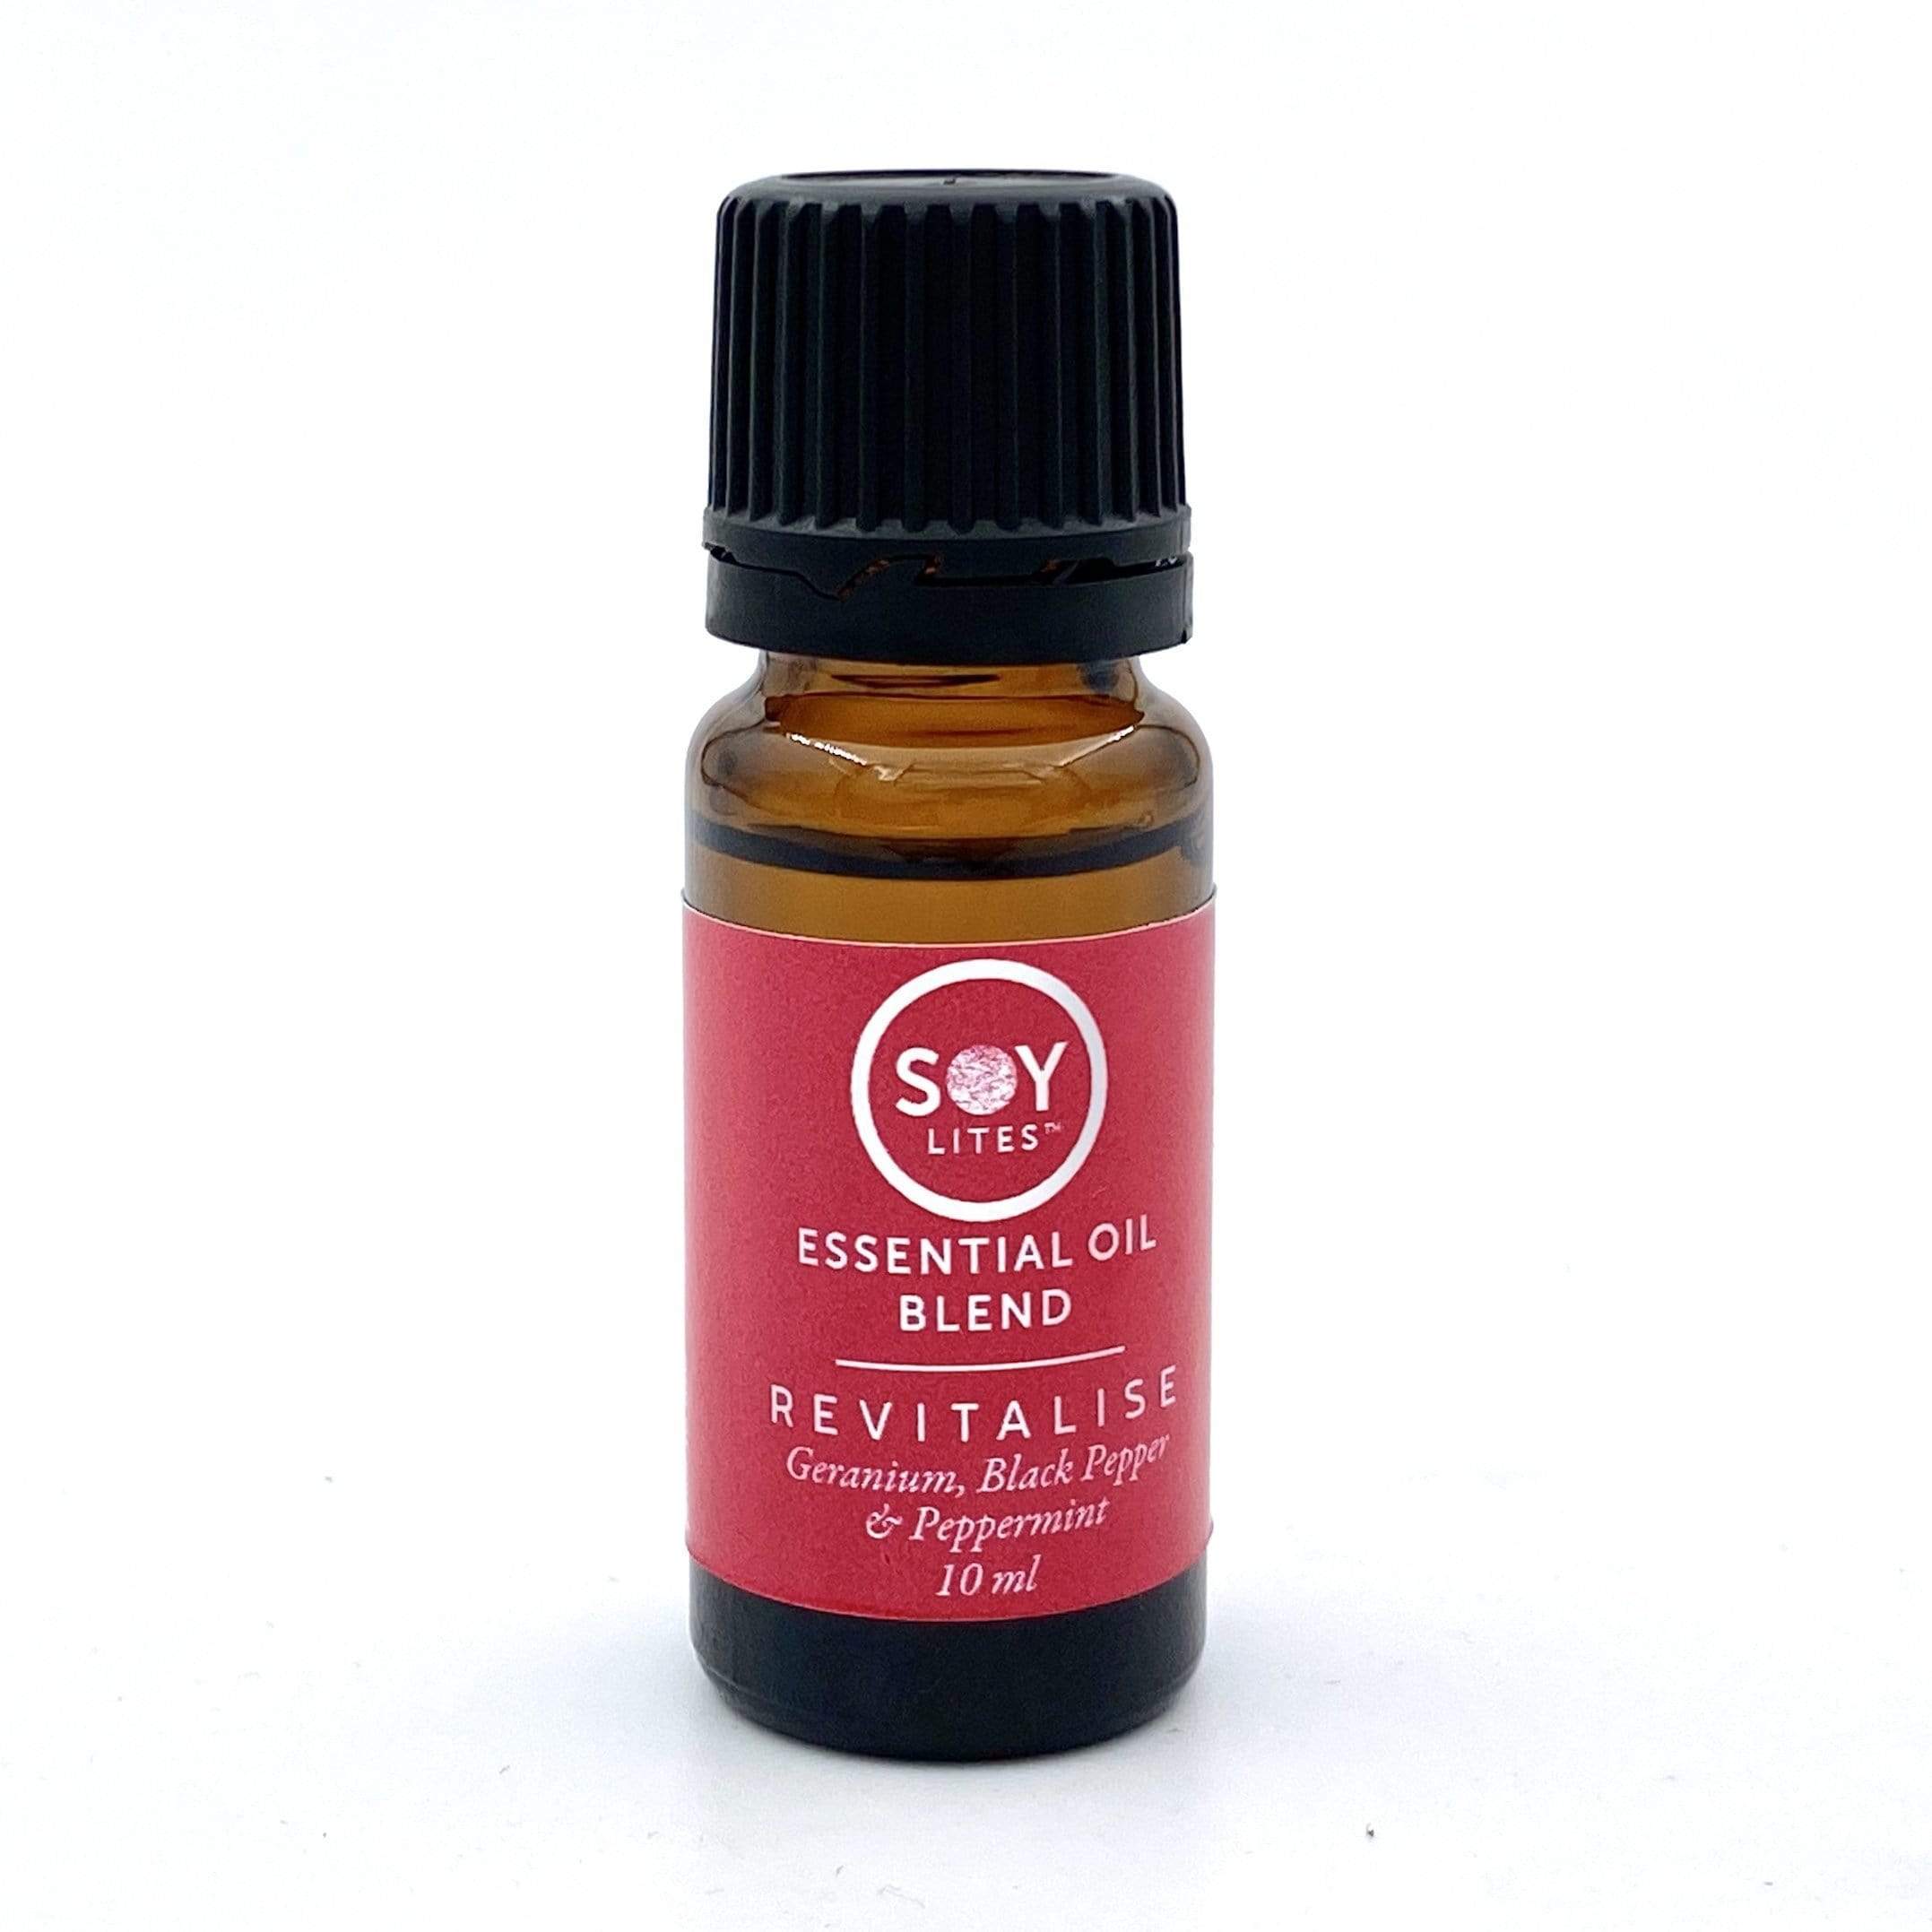 SoyLites 10ml Aromatherapy 10ml Revitalise: Geranium, Black Pepper and Peppermint with Arnica